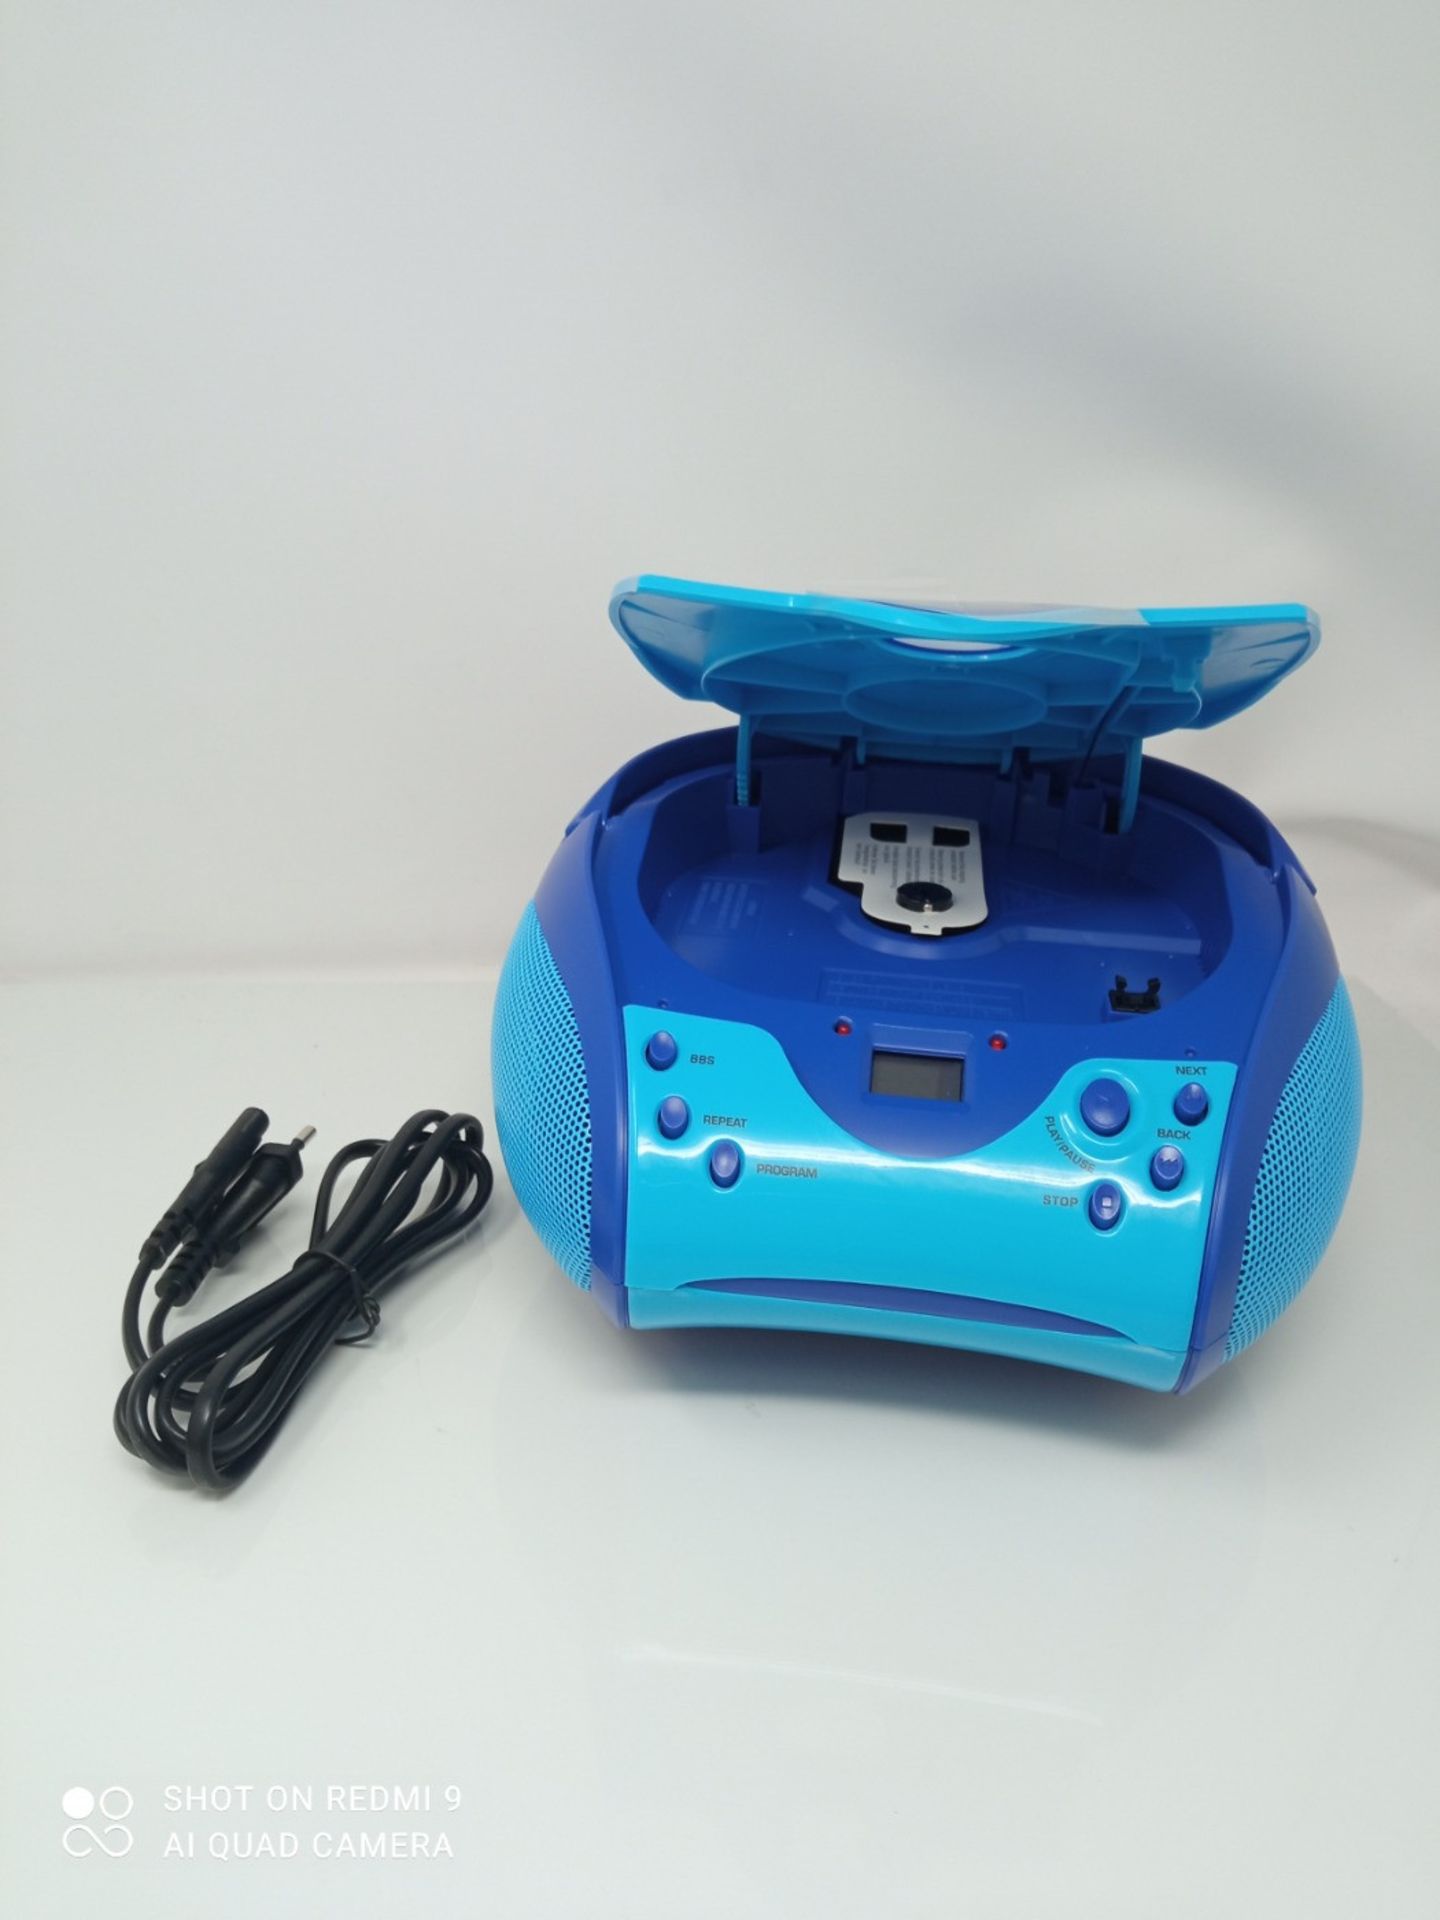 Lenco A004467 SCD-24 Kids - CD player for children - CD radio - with stickers - boombo - Image 3 of 3